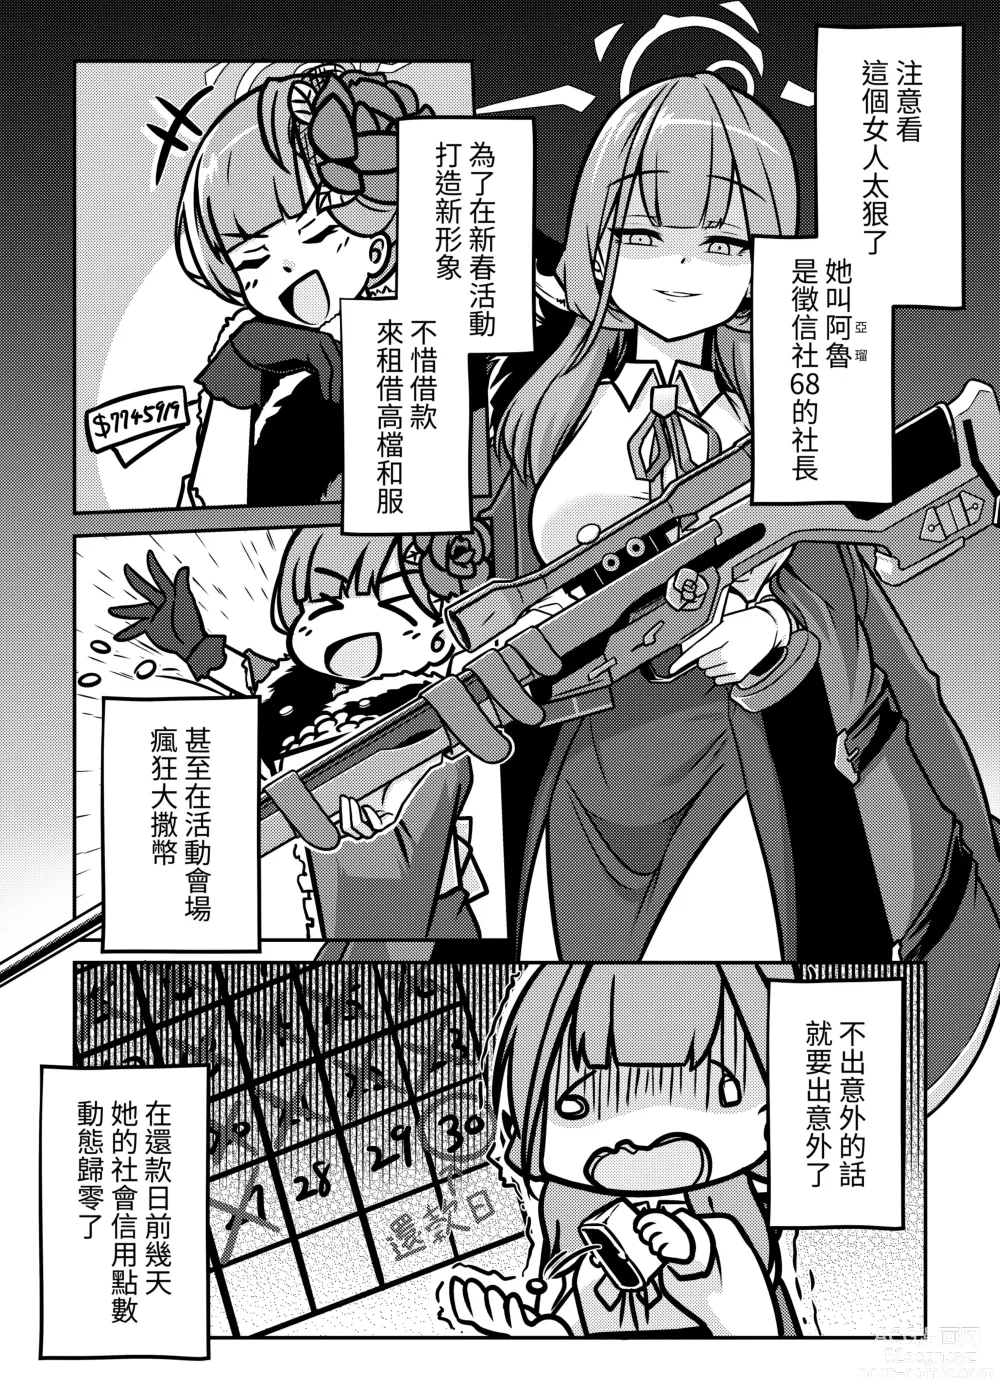 Page 3 of doujinshi 讓借單飛 Let the Debts Fly